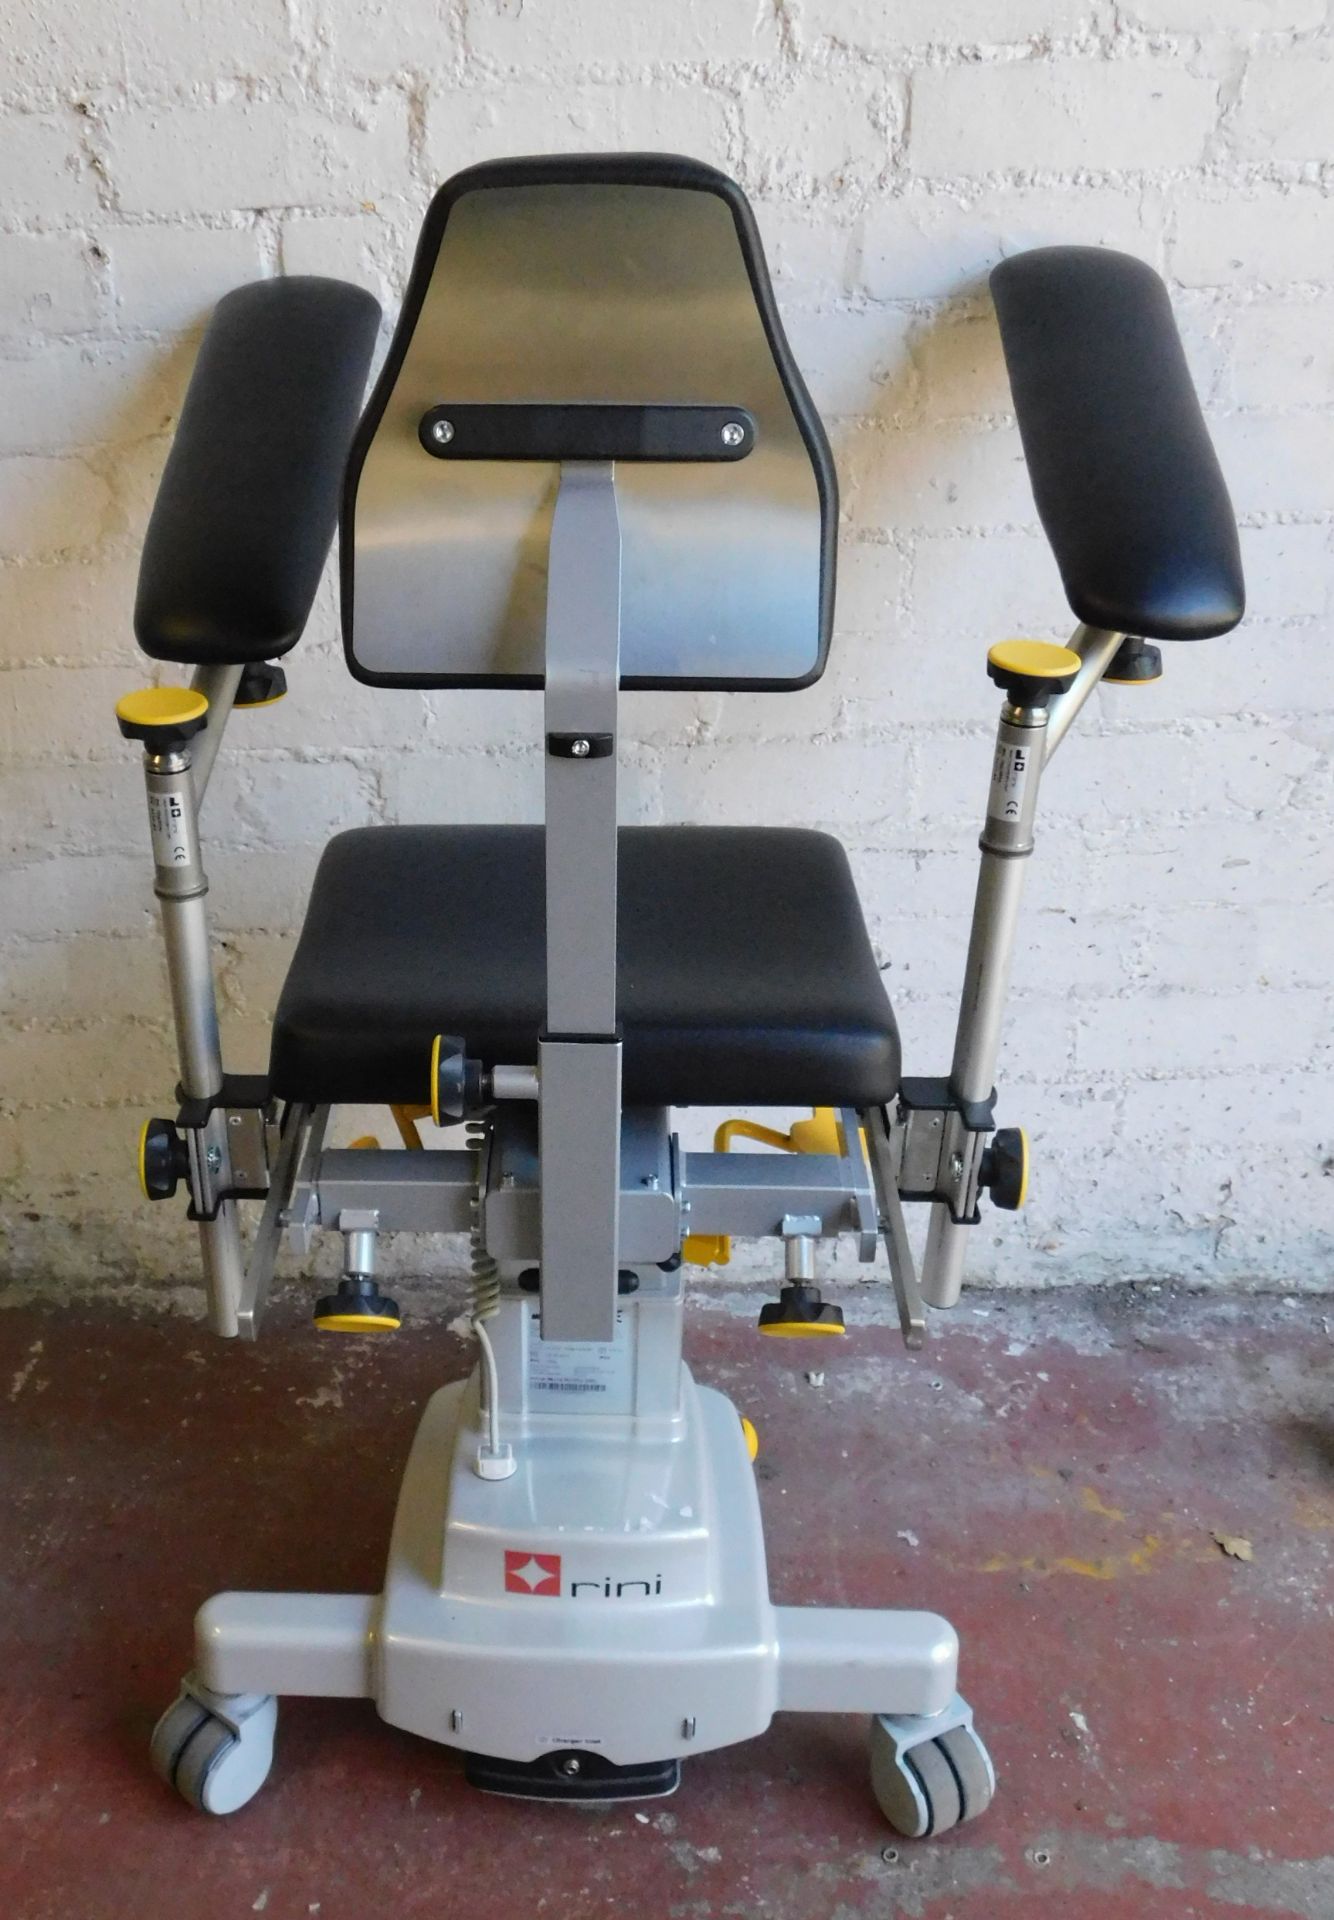 Rini Carl MK2 IPX 4 Surgeon Chair, Serial Number 0345 -30, SWL 150Kg (Location: Bushey. Please Refer - Image 2 of 3